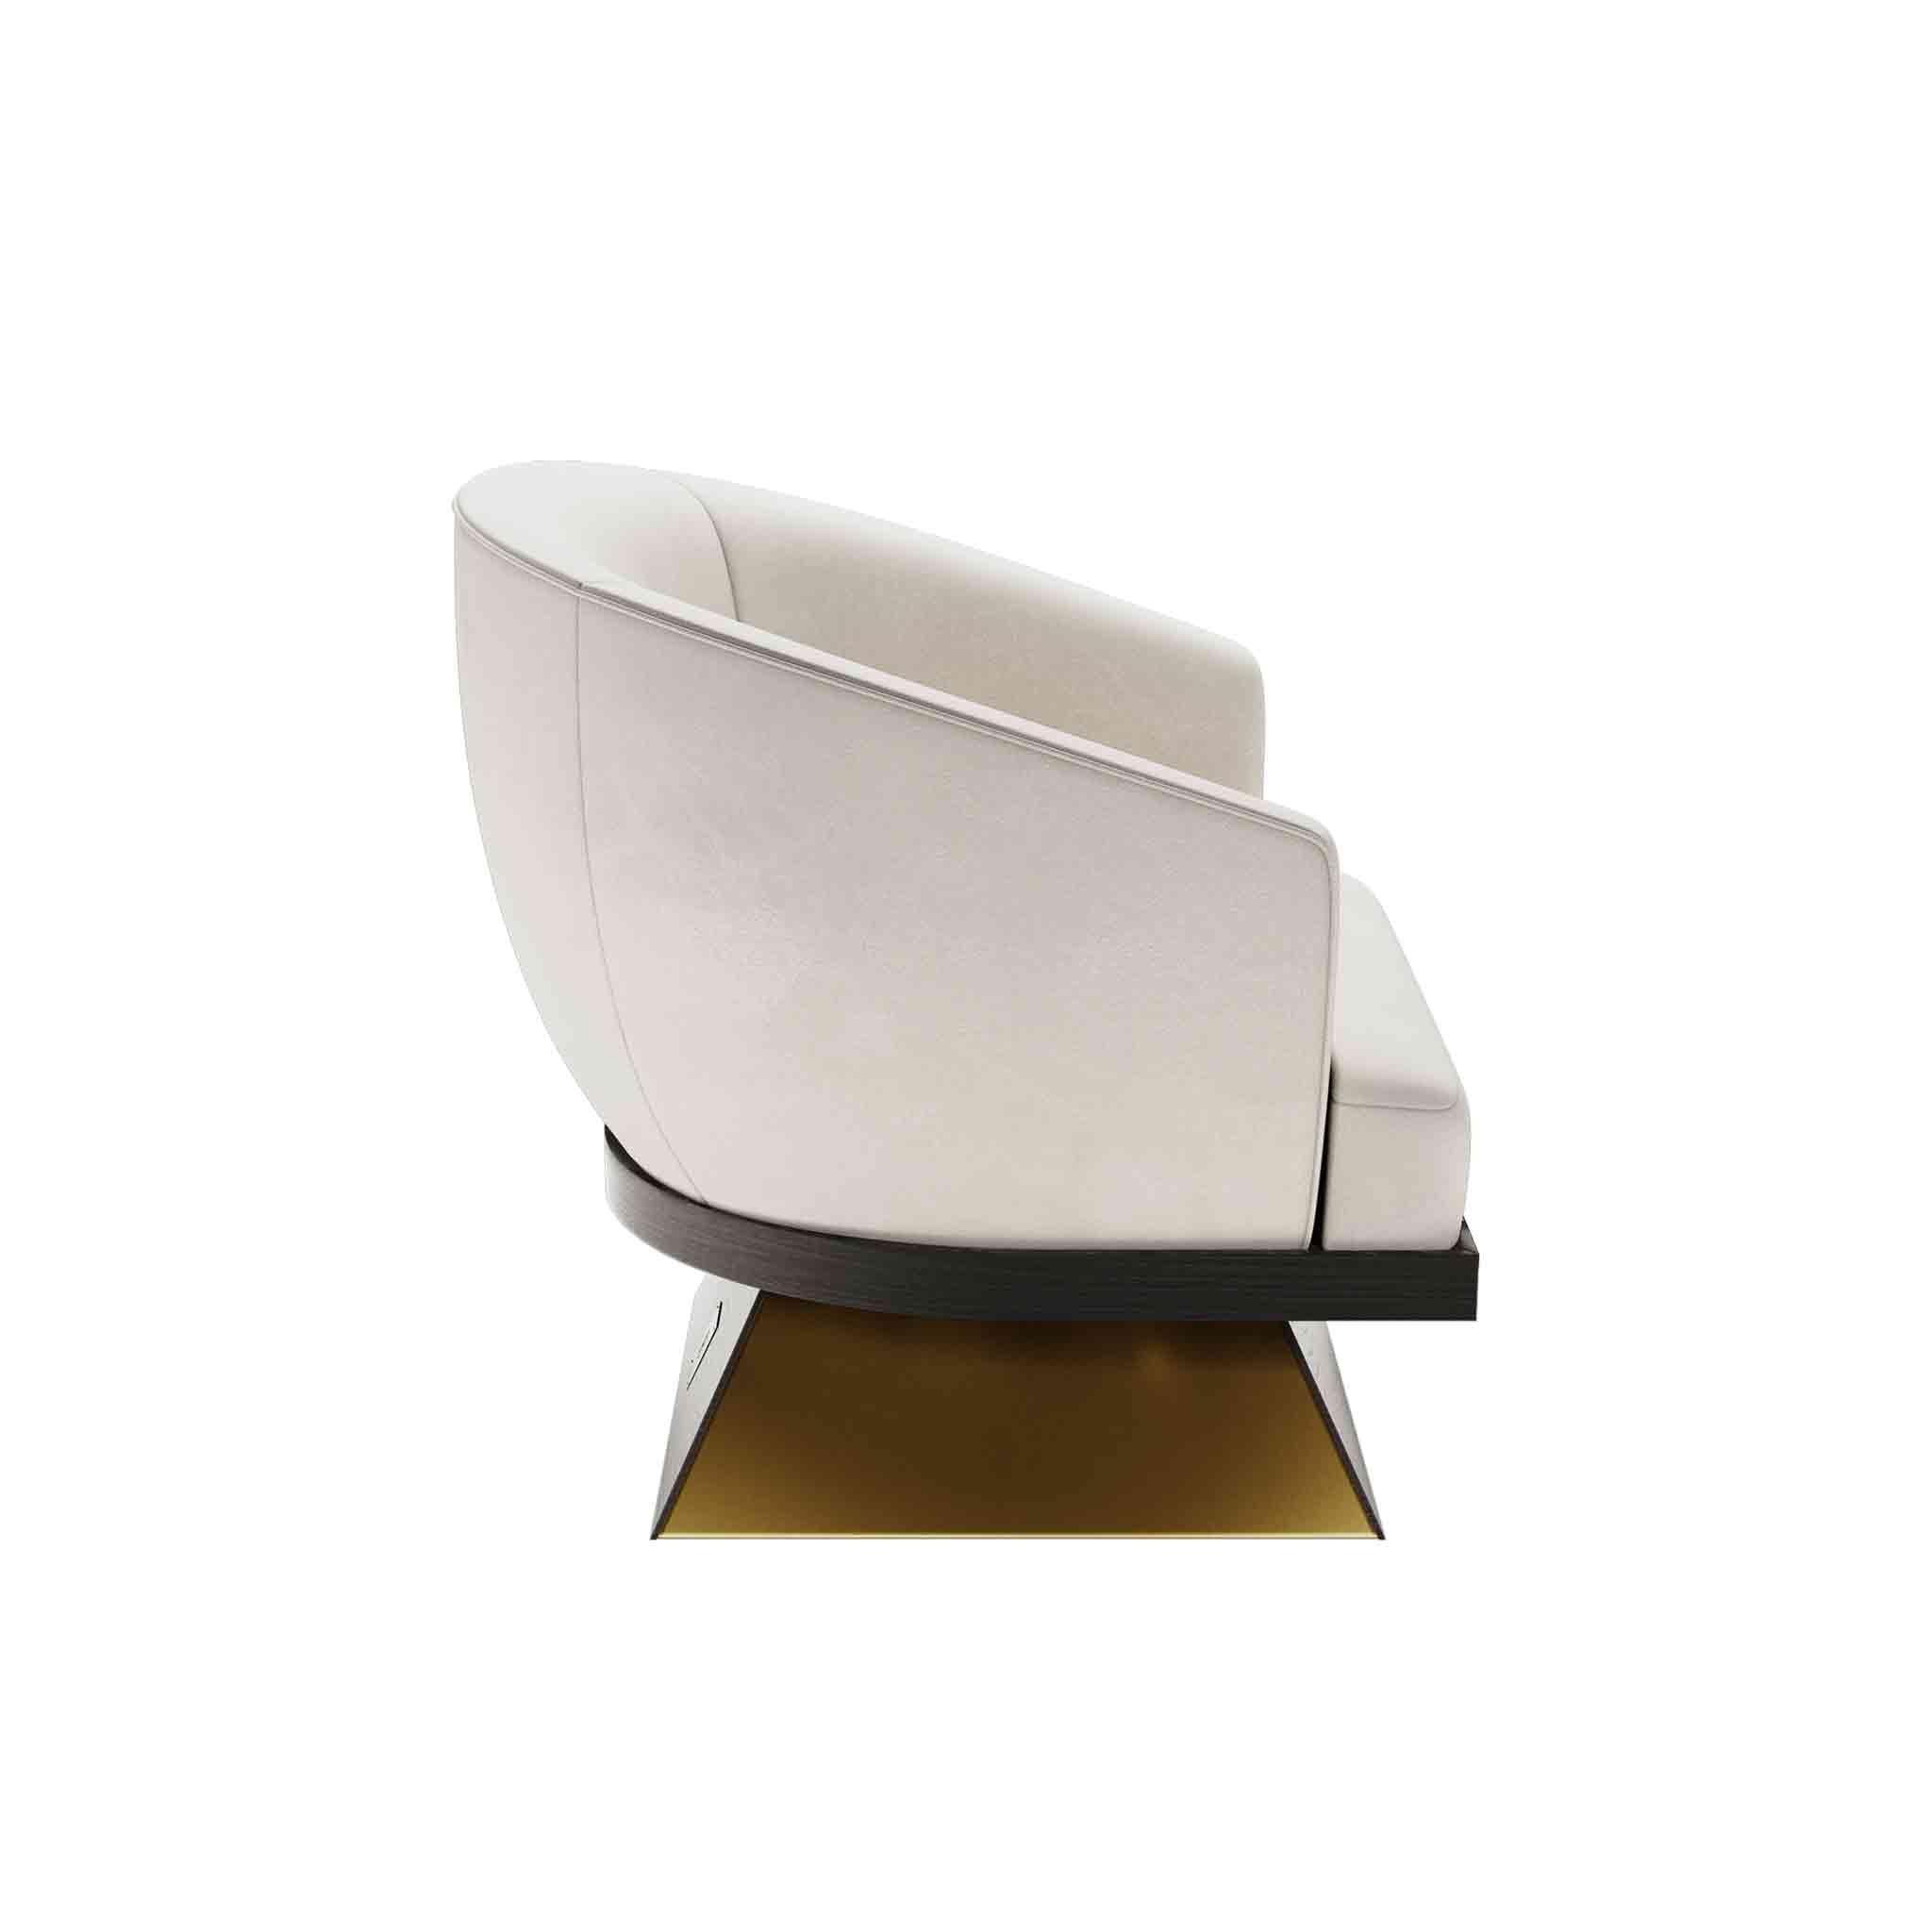 Portuguese Modern Armchair in White Suede, Black Wenge Base & Gold Details  For Sale